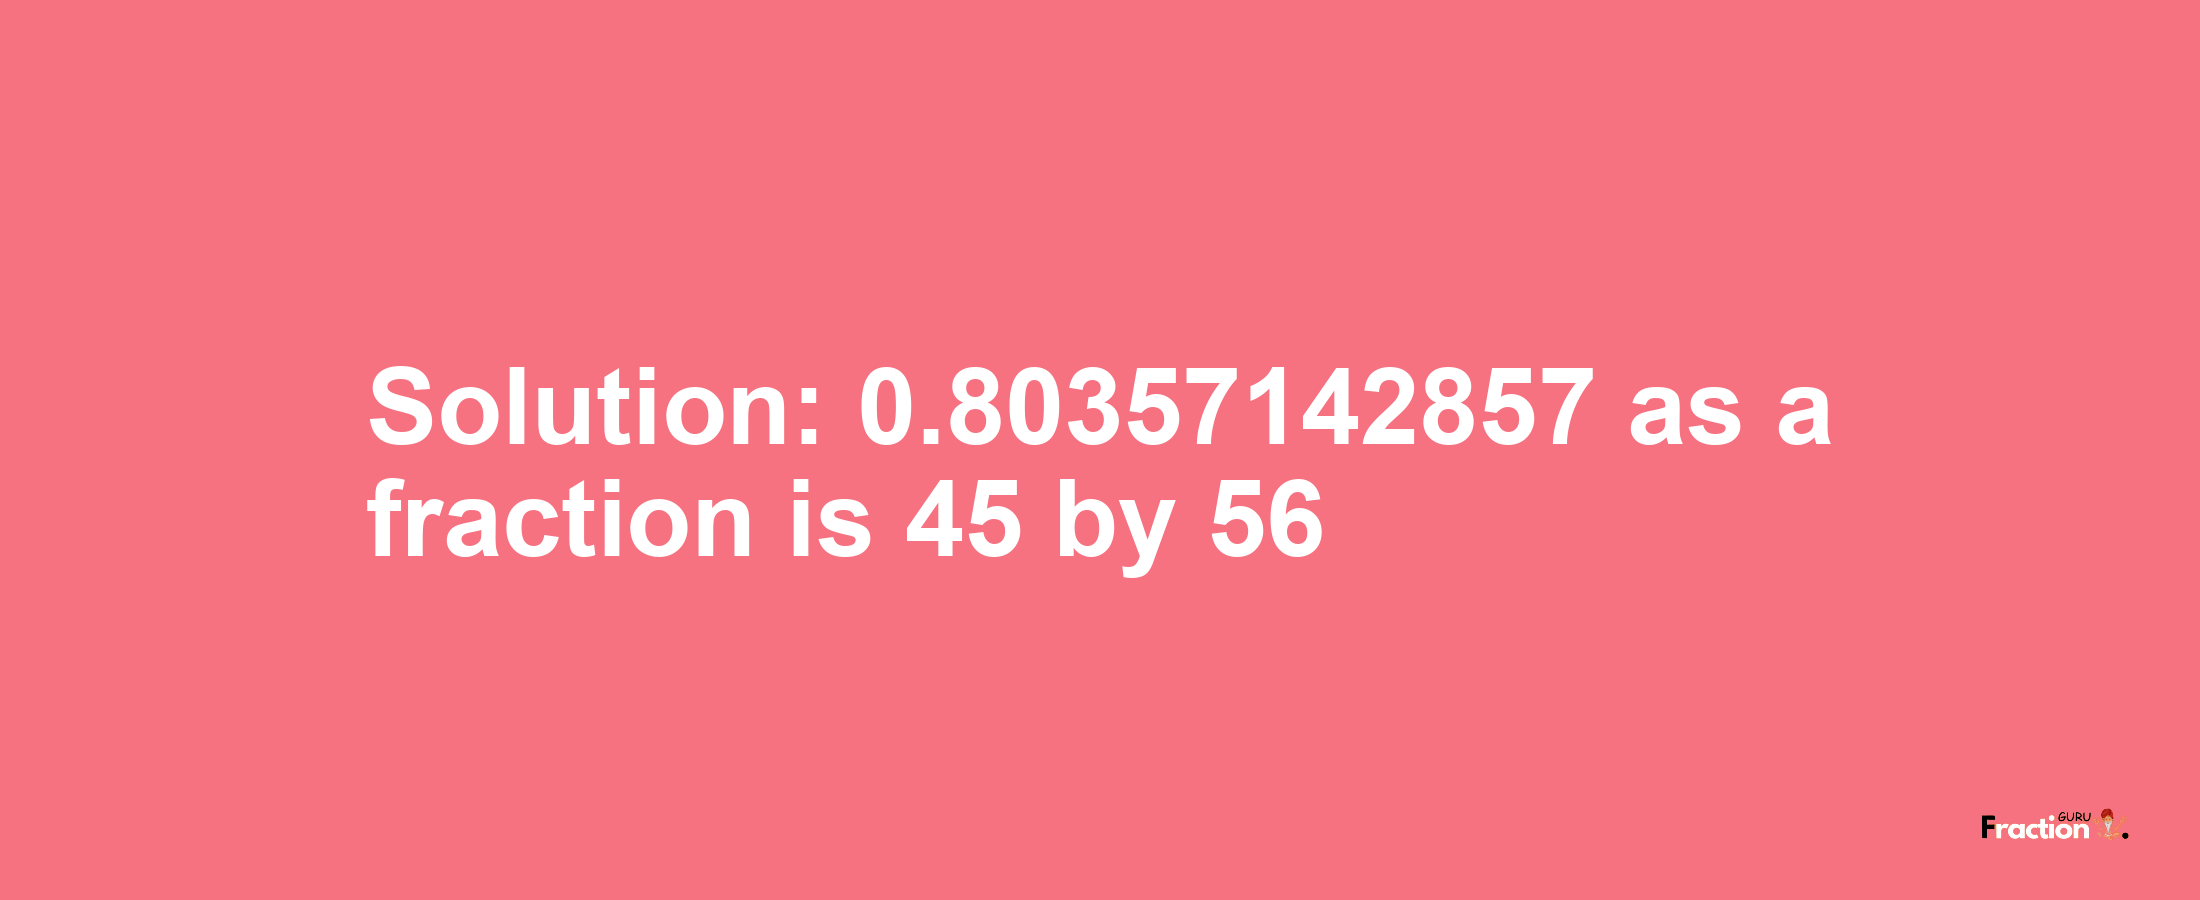 Solution:0.80357142857 as a fraction is 45/56